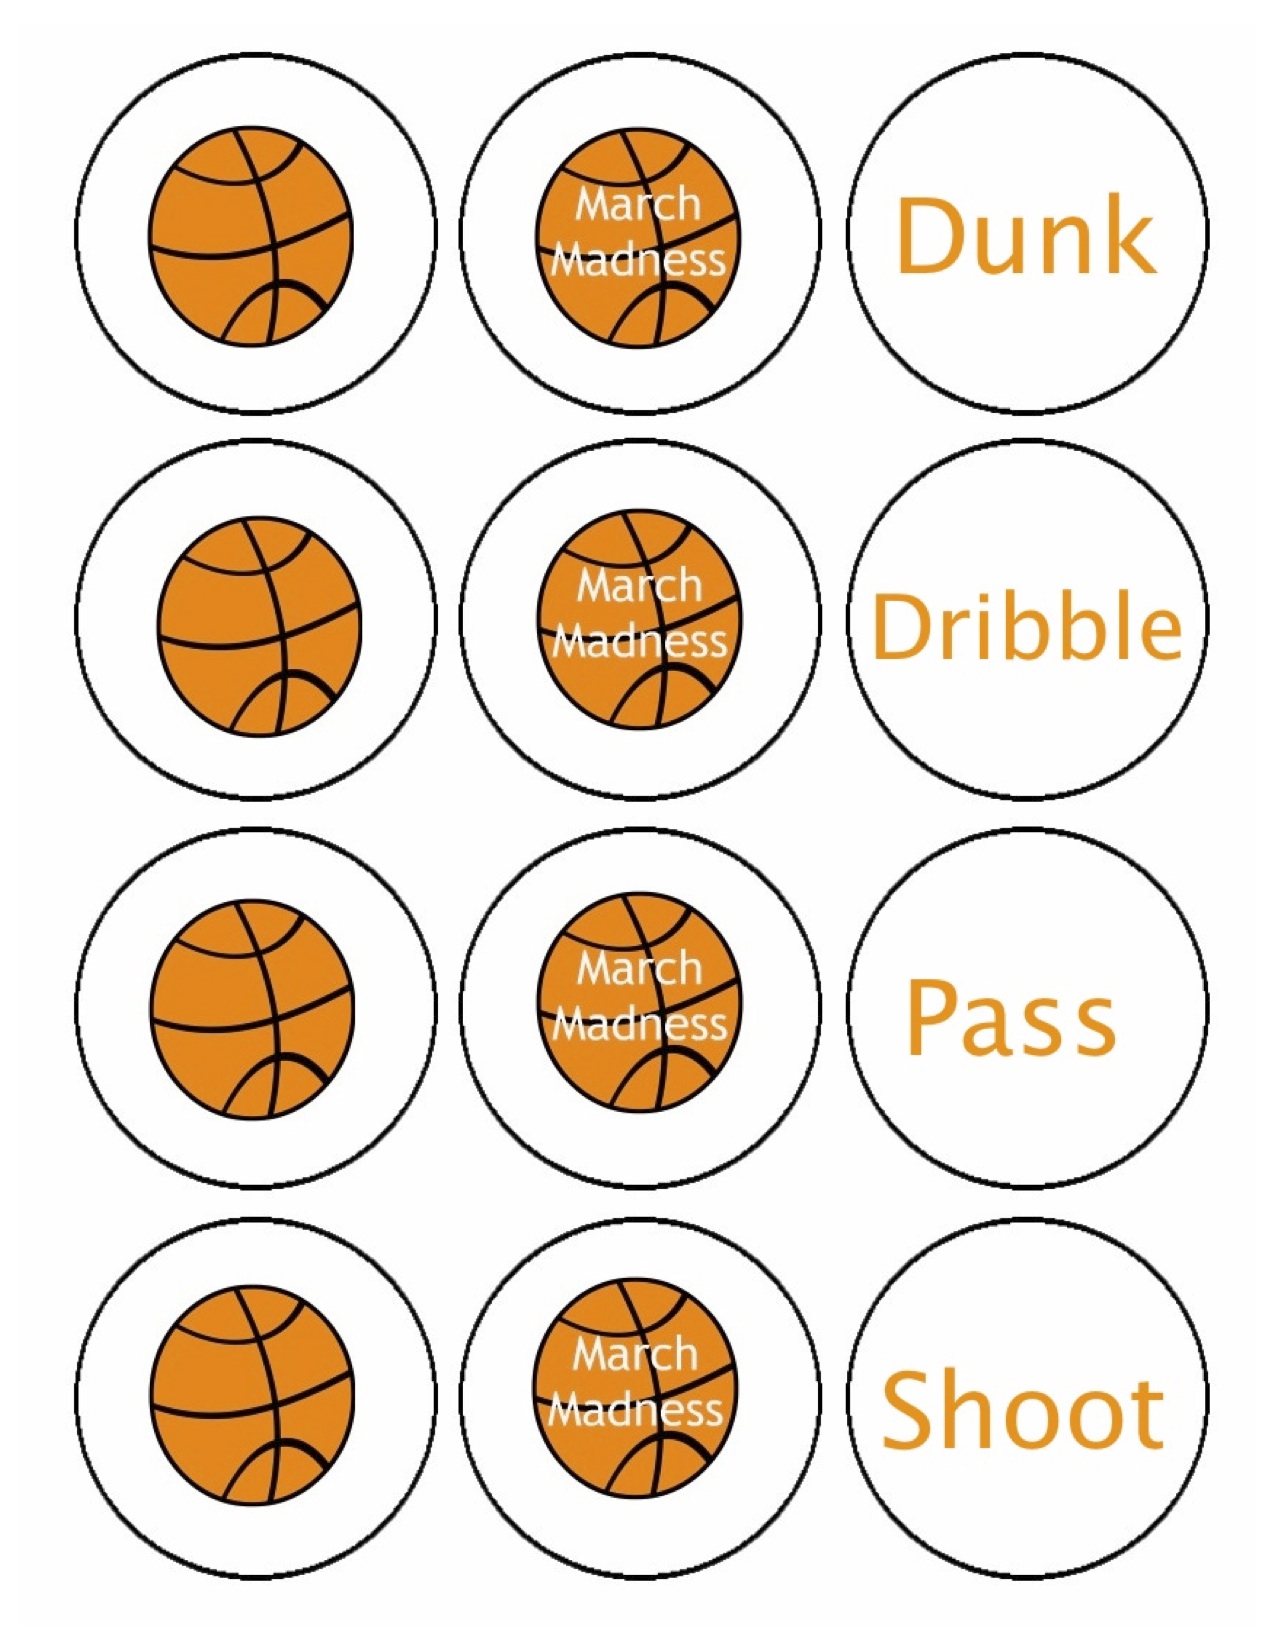 March Madness Free Printables  Creative Party Themes